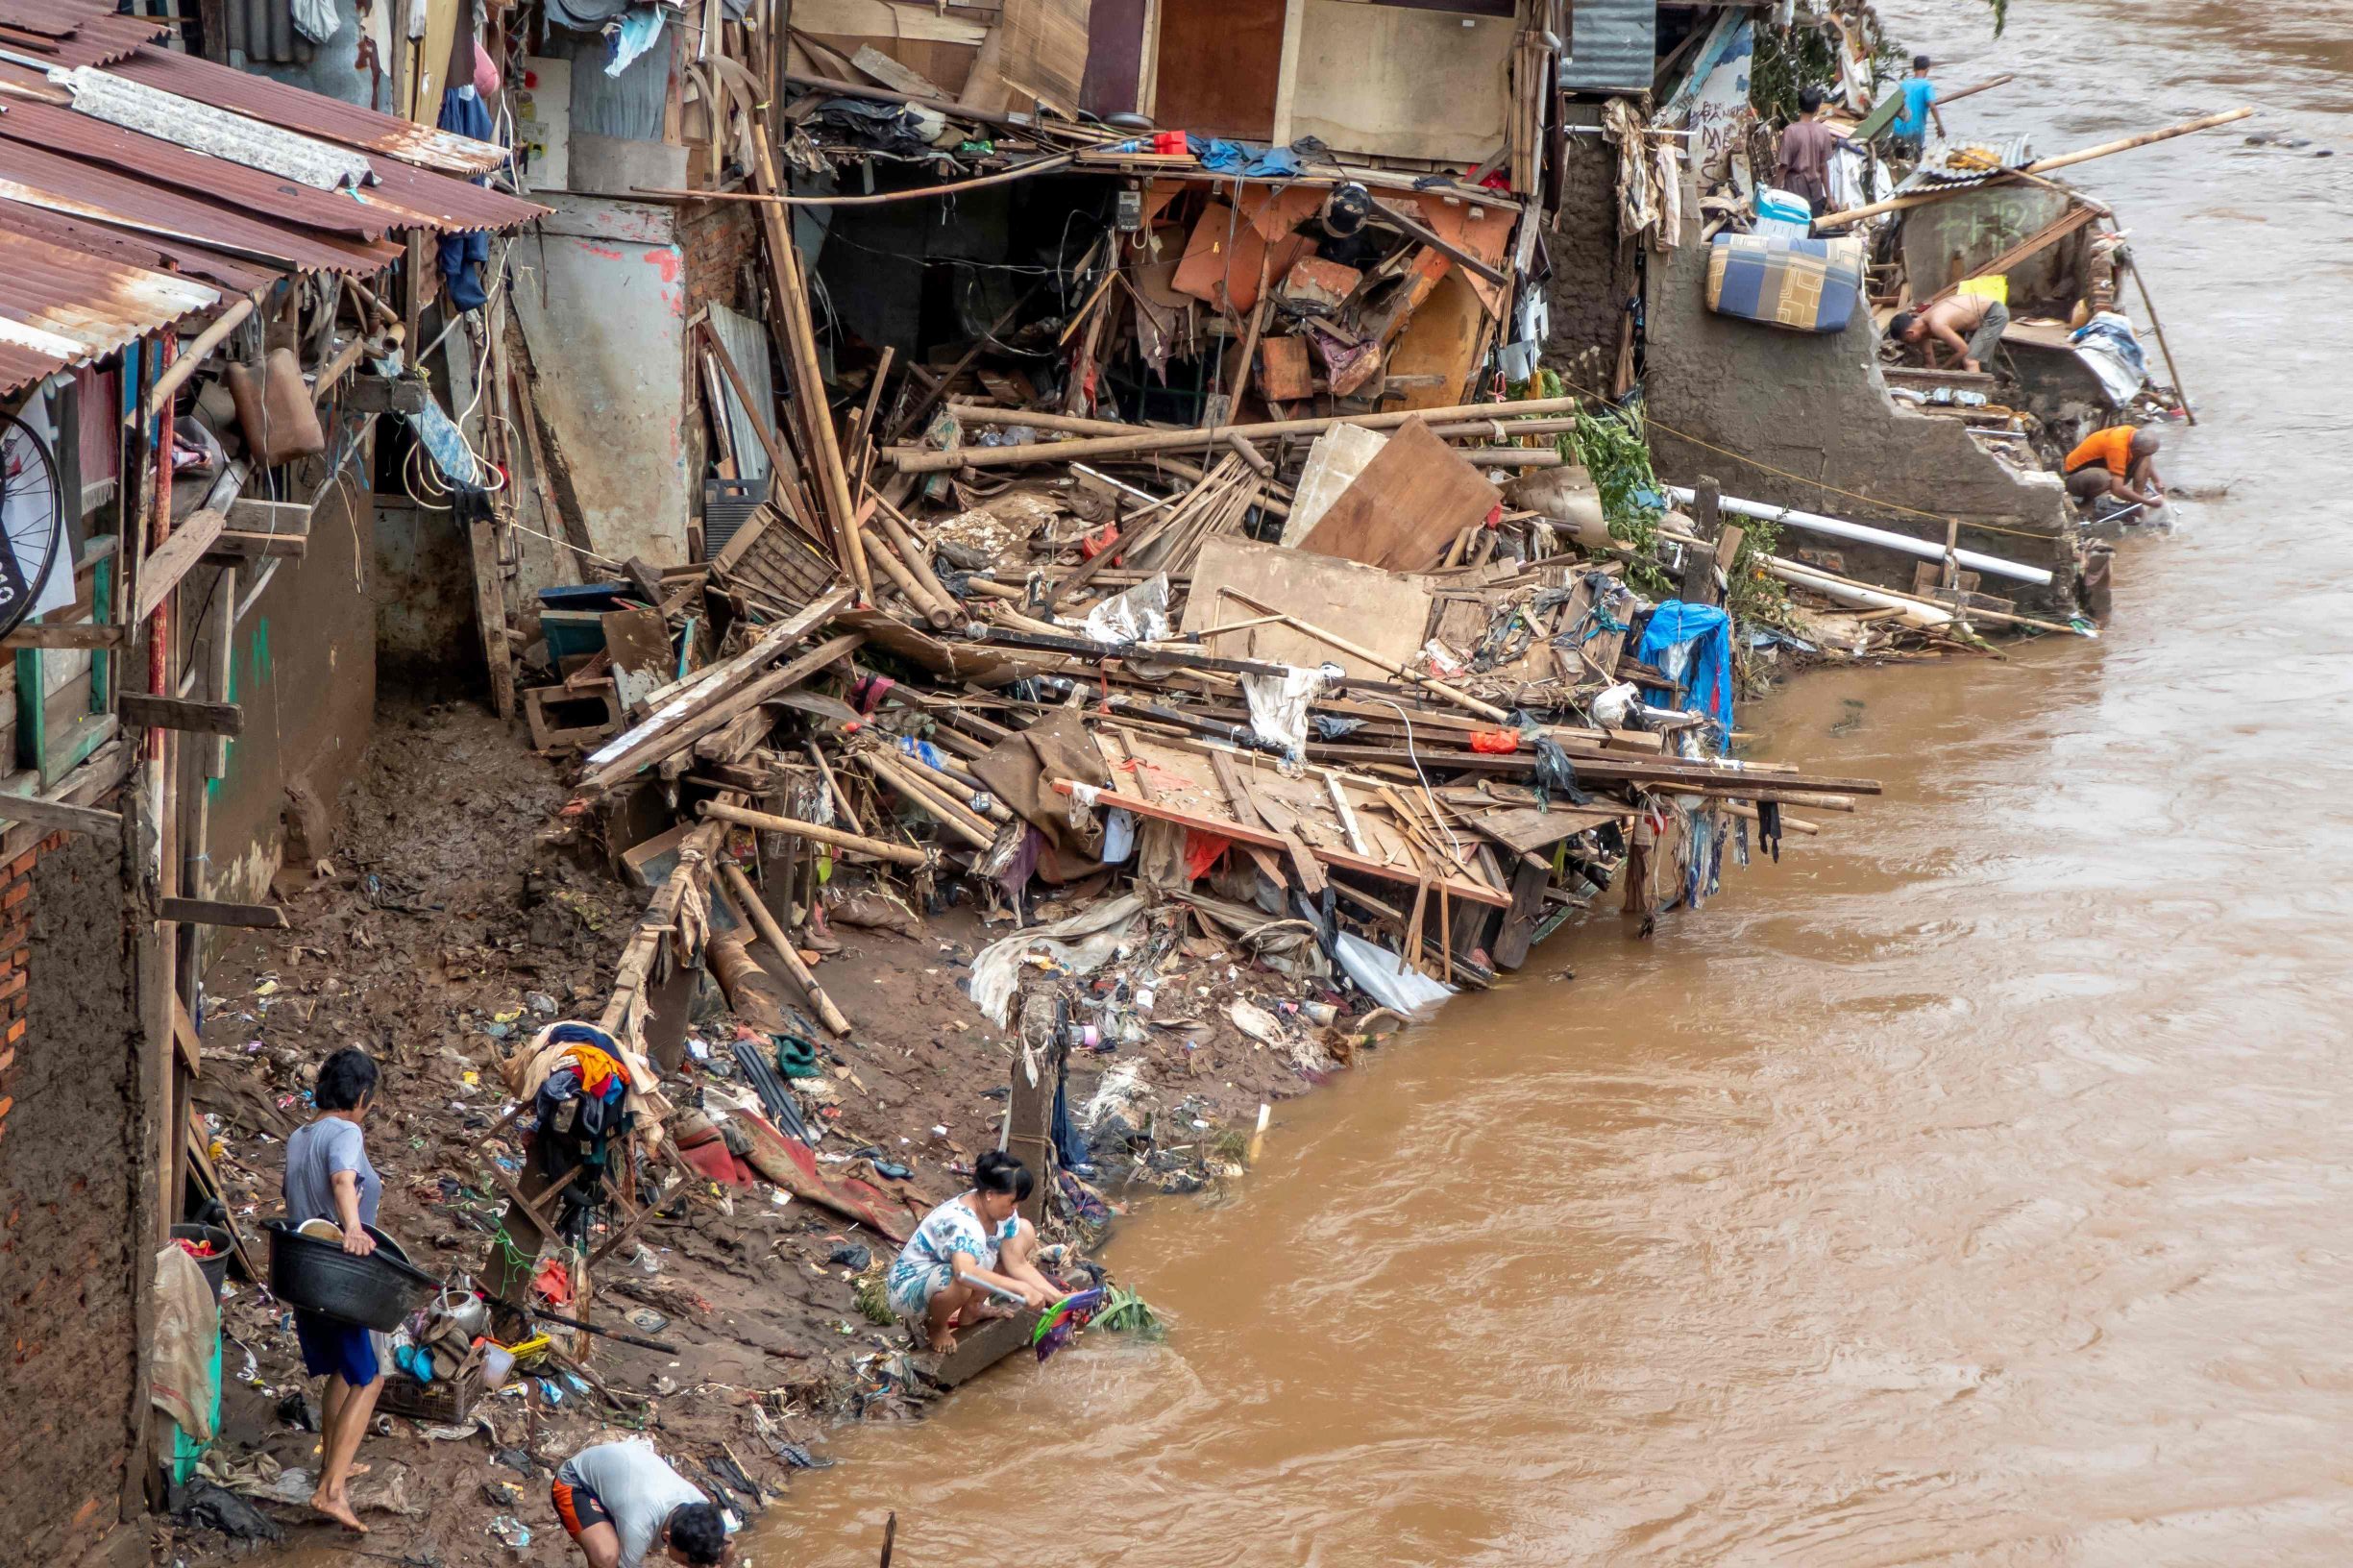 Indonesians clean their homes and cutlery along the river in Jakarta on January 3, 2020, after flooding triggered by heavy rain which started on New Year's Eve hit the area. - Indonesian rescuers mounted a desperate search on January 3 for those missing after flash floods and landslides sparked by torrential rains killed at least 43 people across the Jakarta region, leaving whole districts under water and thousands homeless. (Photo by BAY ISMOYO / AFP)